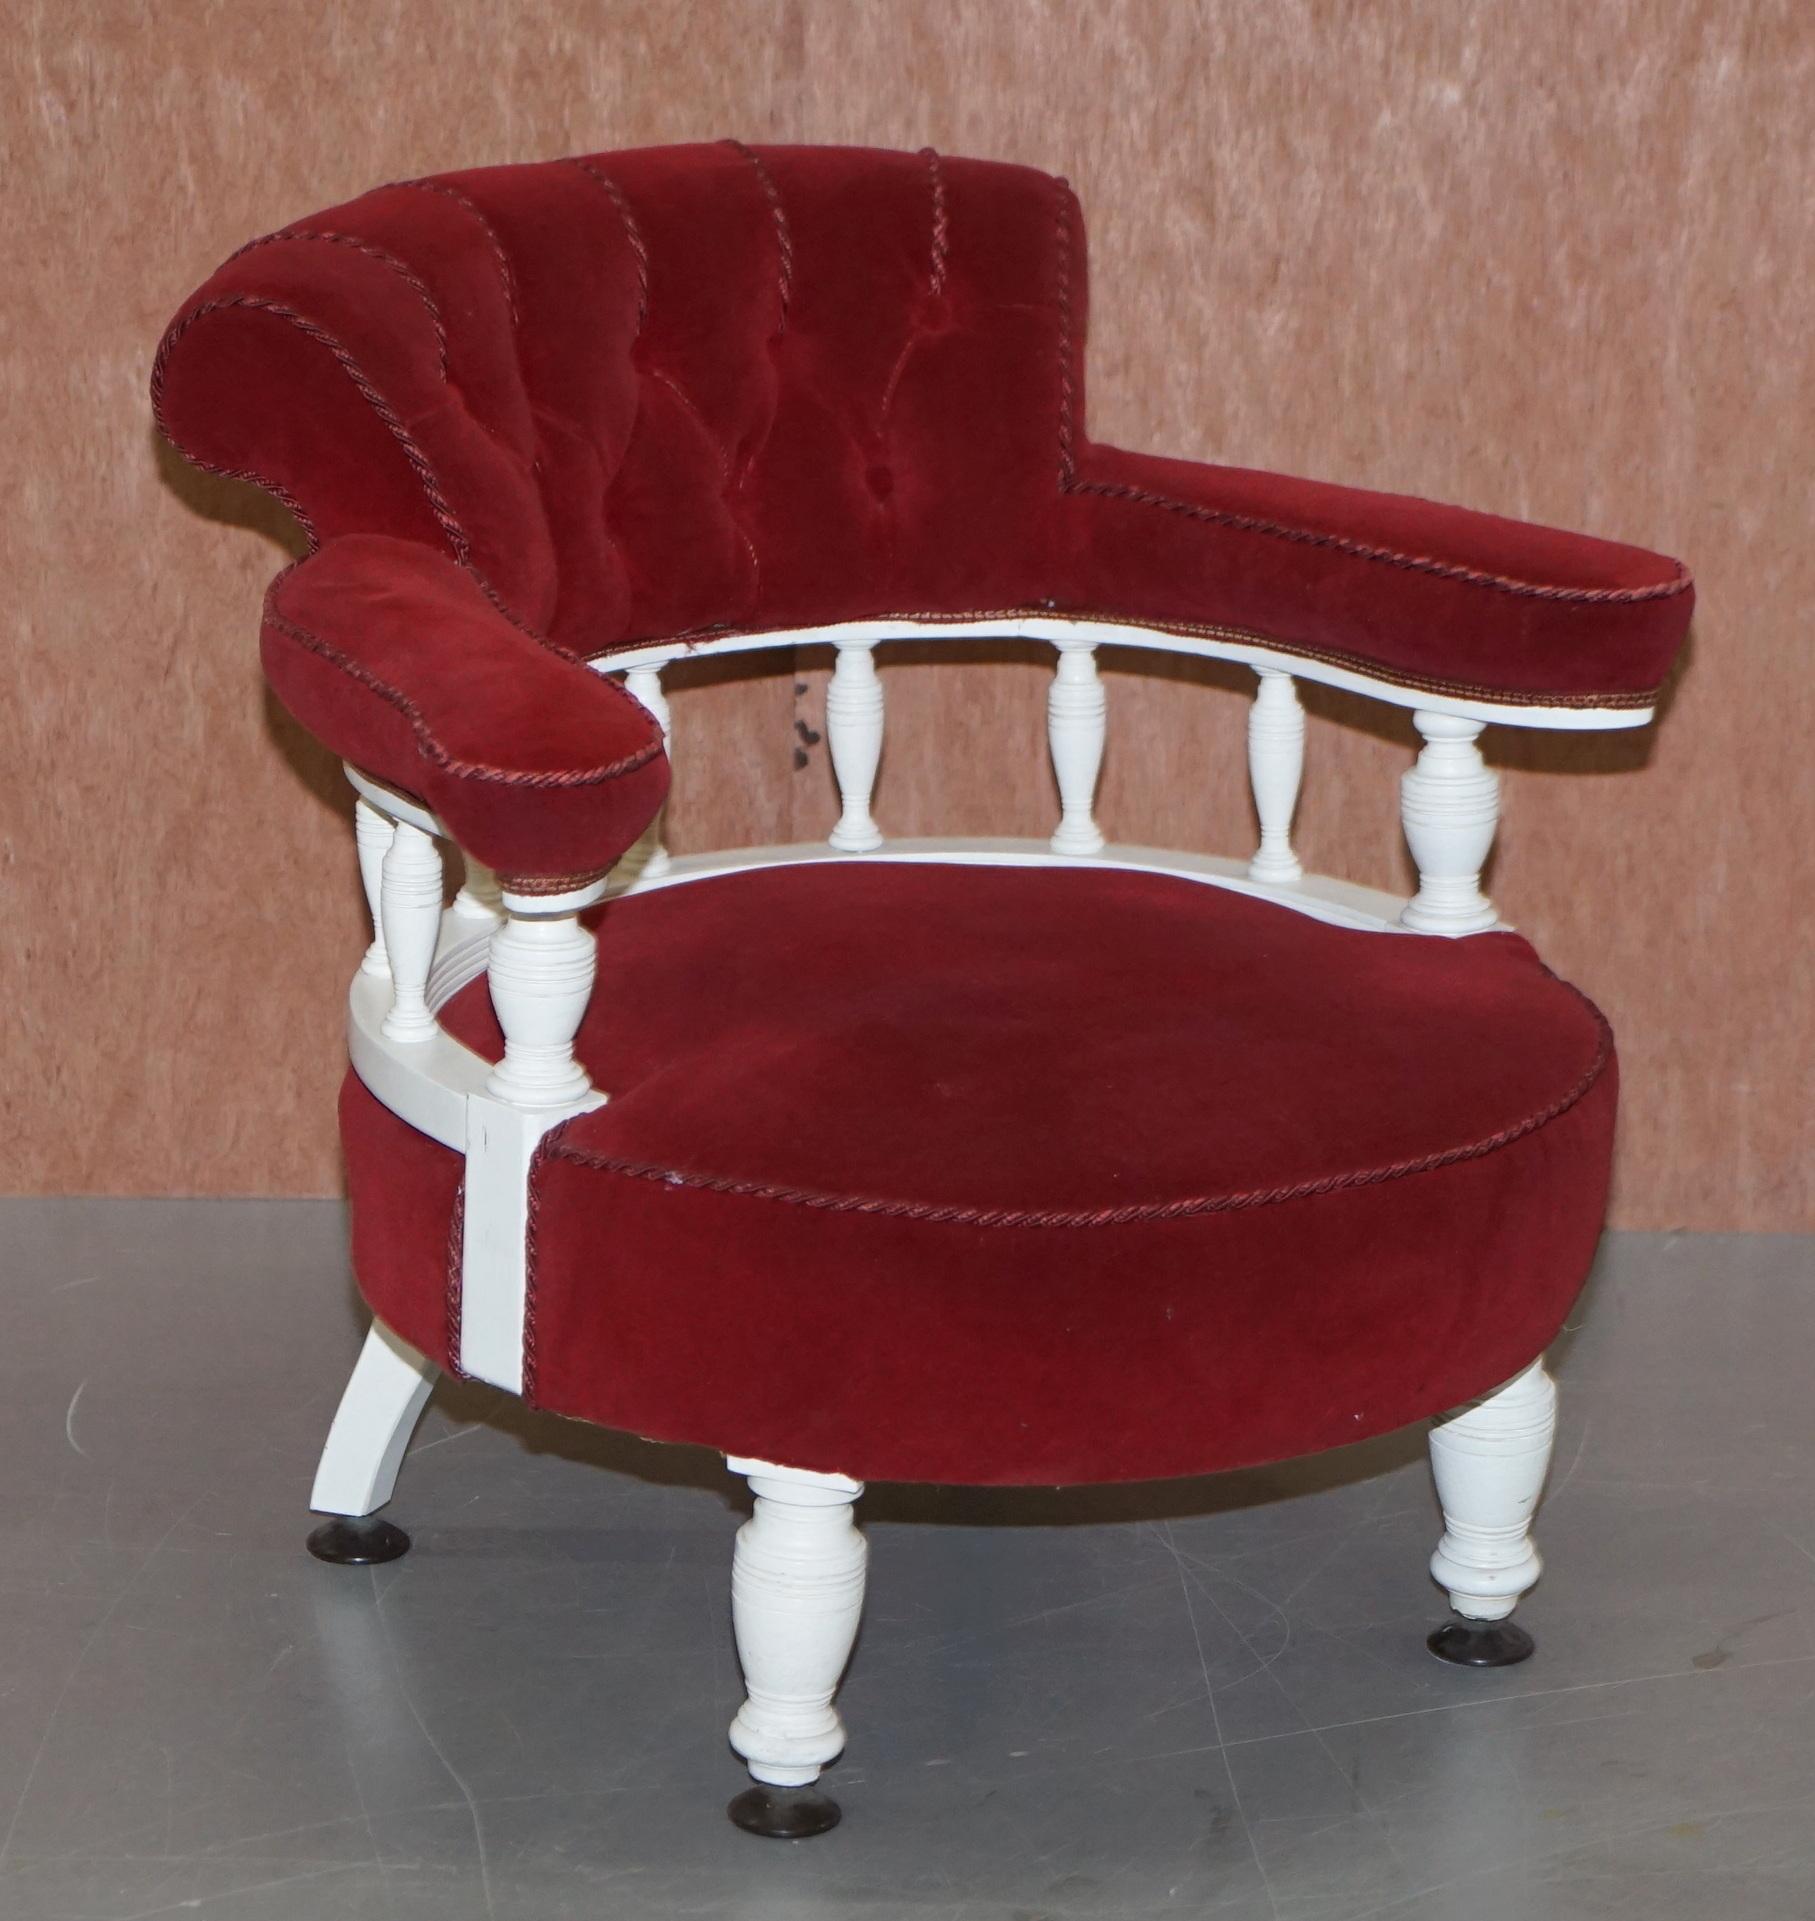 We are delighted to offer for sale this period Victorian circa 1860 handmade captains occasional armchair

A comfortable and decorative piece, the chair has a hand painted white frame, red velvet upholstery and original hessian base cover. The